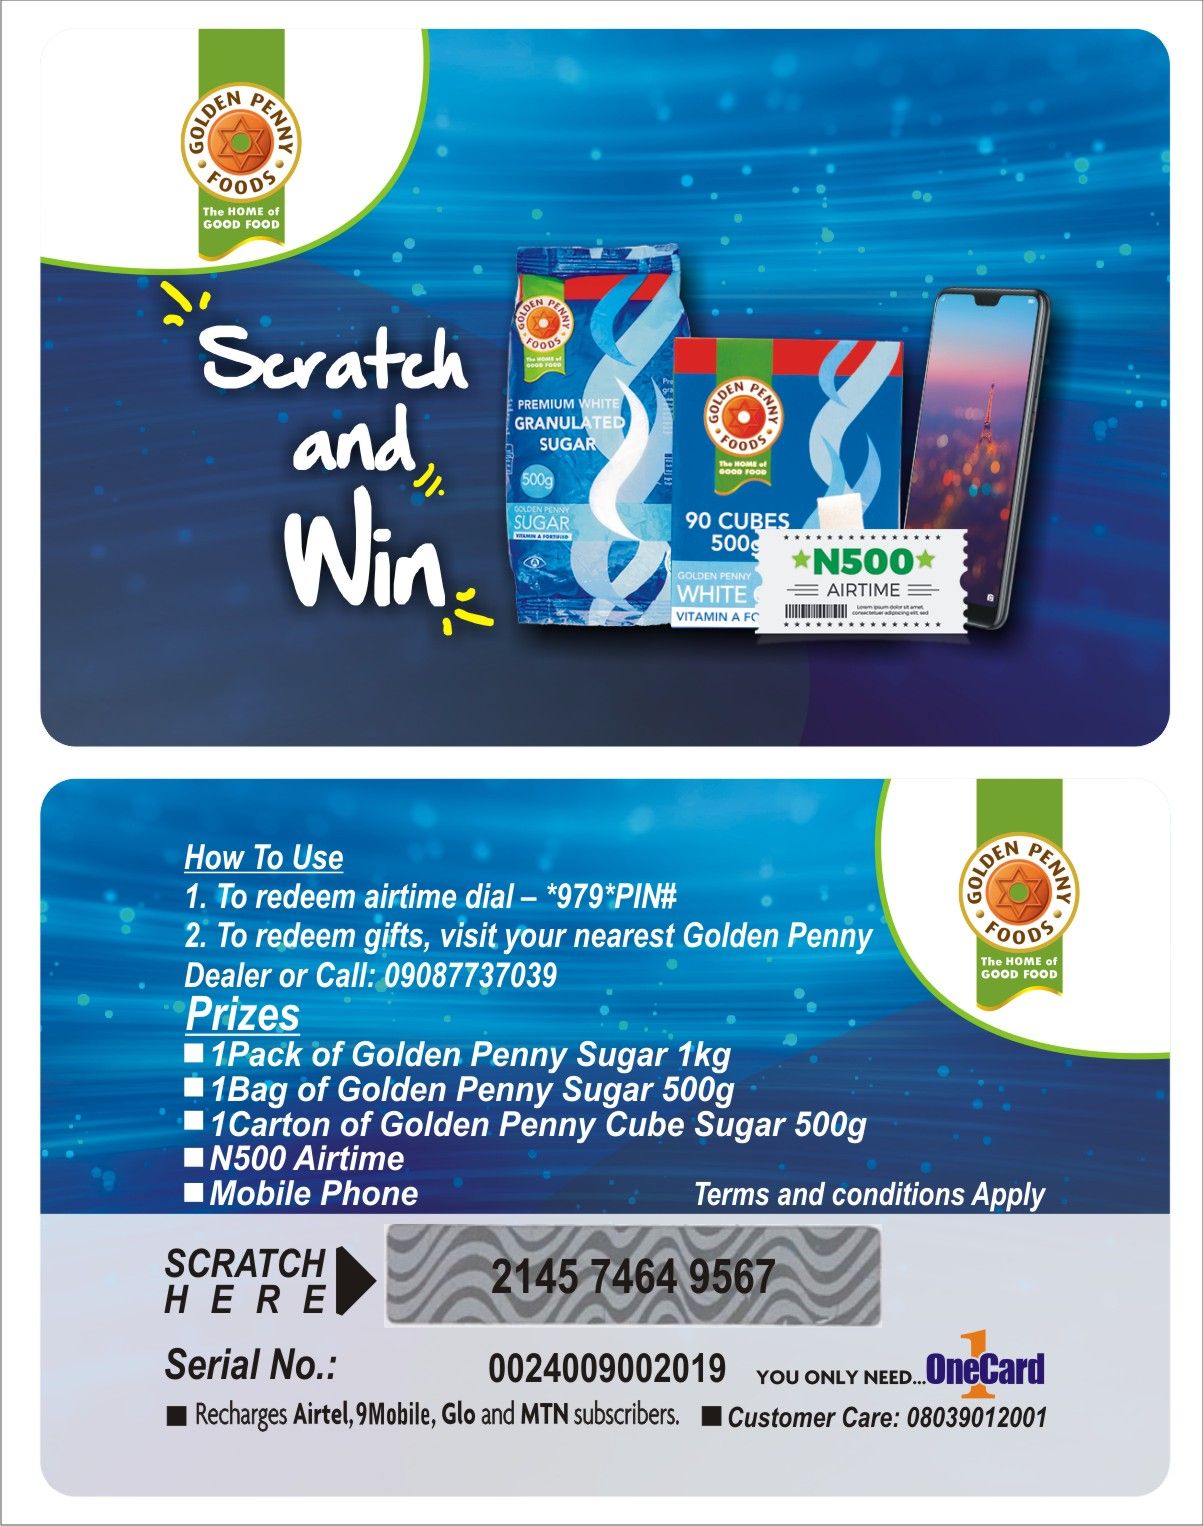 CALL CHINEDU ON 08179651585 TO PRINT SCRATCH AND WIN PROMO CARDS, PORTAL ACCESS SCRATCH CARDS, THIRD PARTY INSURANCE SCRATCH CARDS